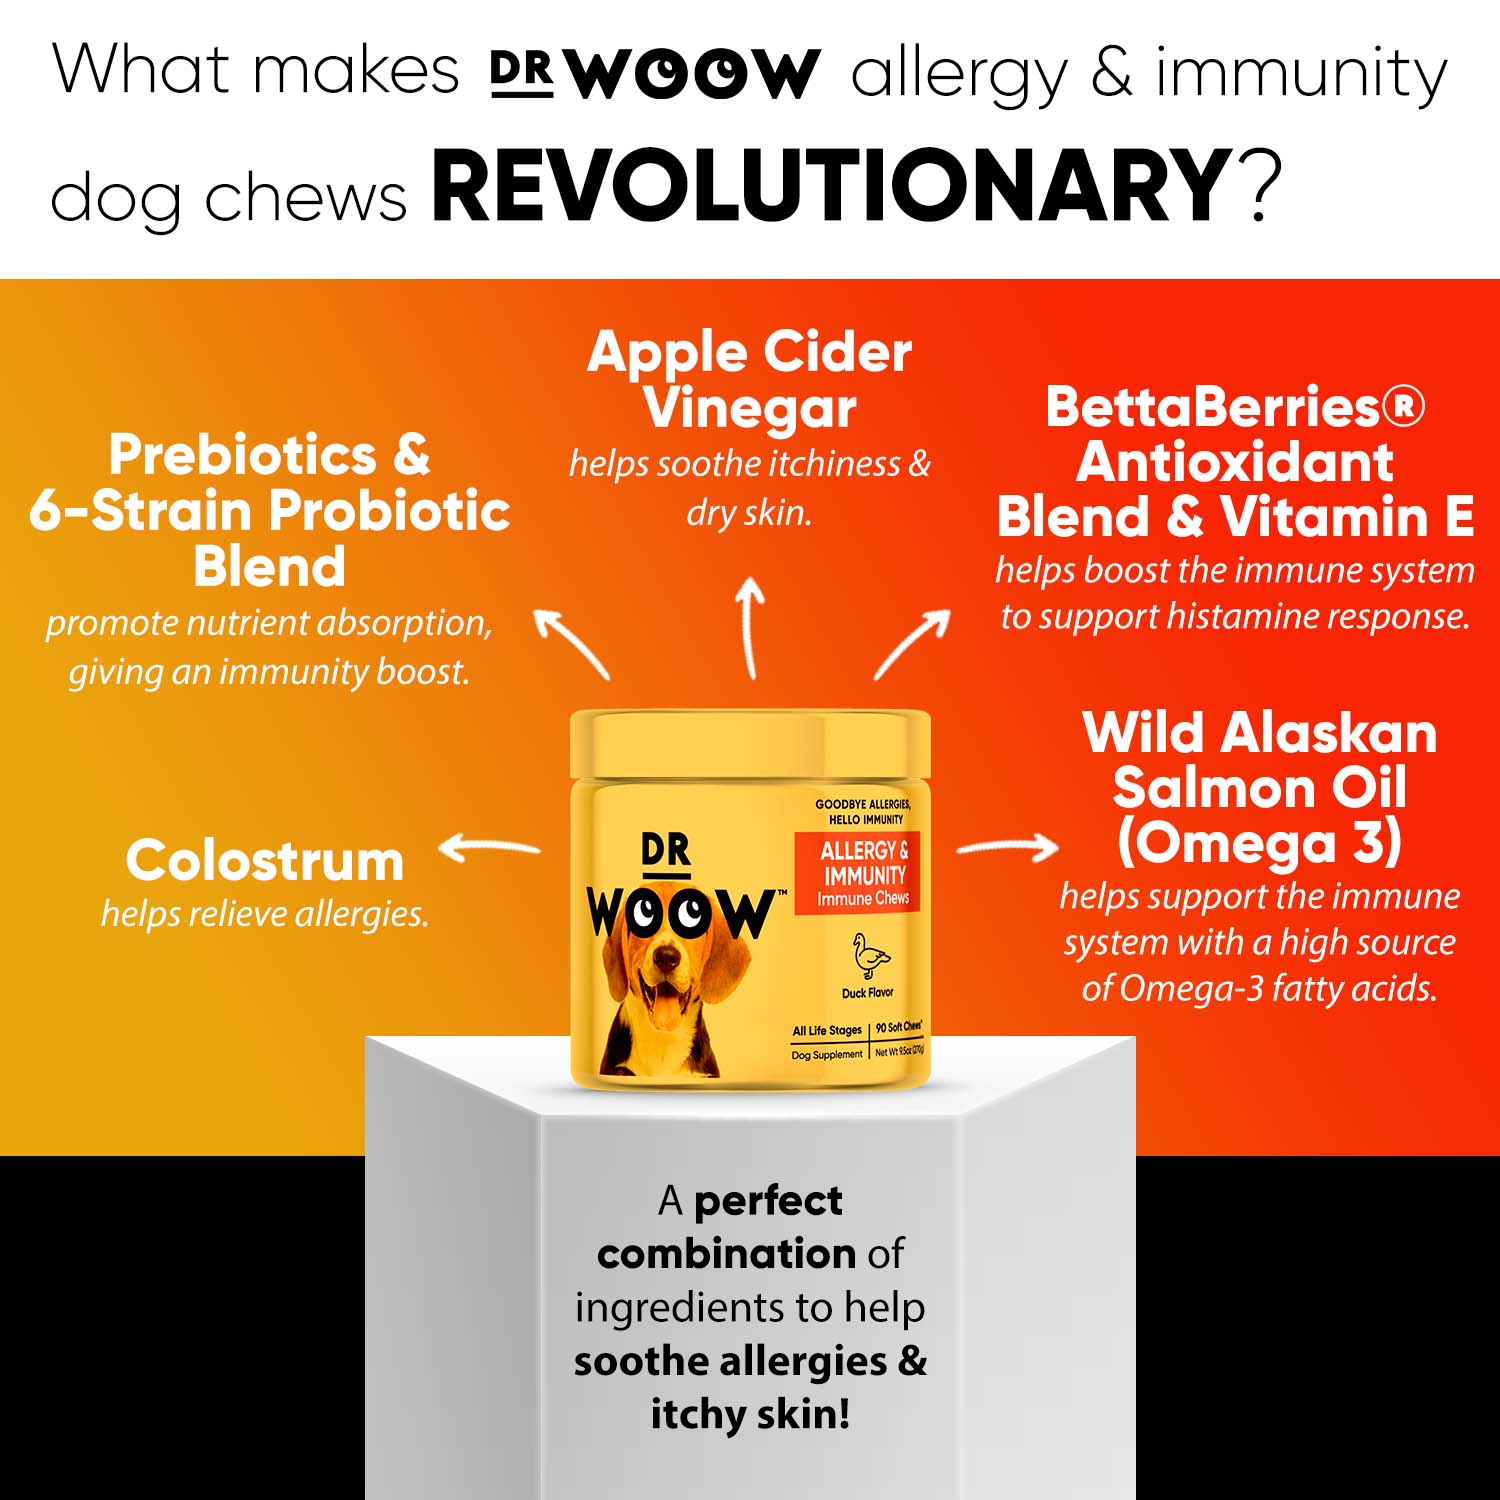 What Makes Dr Woow Allergy & Immunity Dog Chews Revolutionary